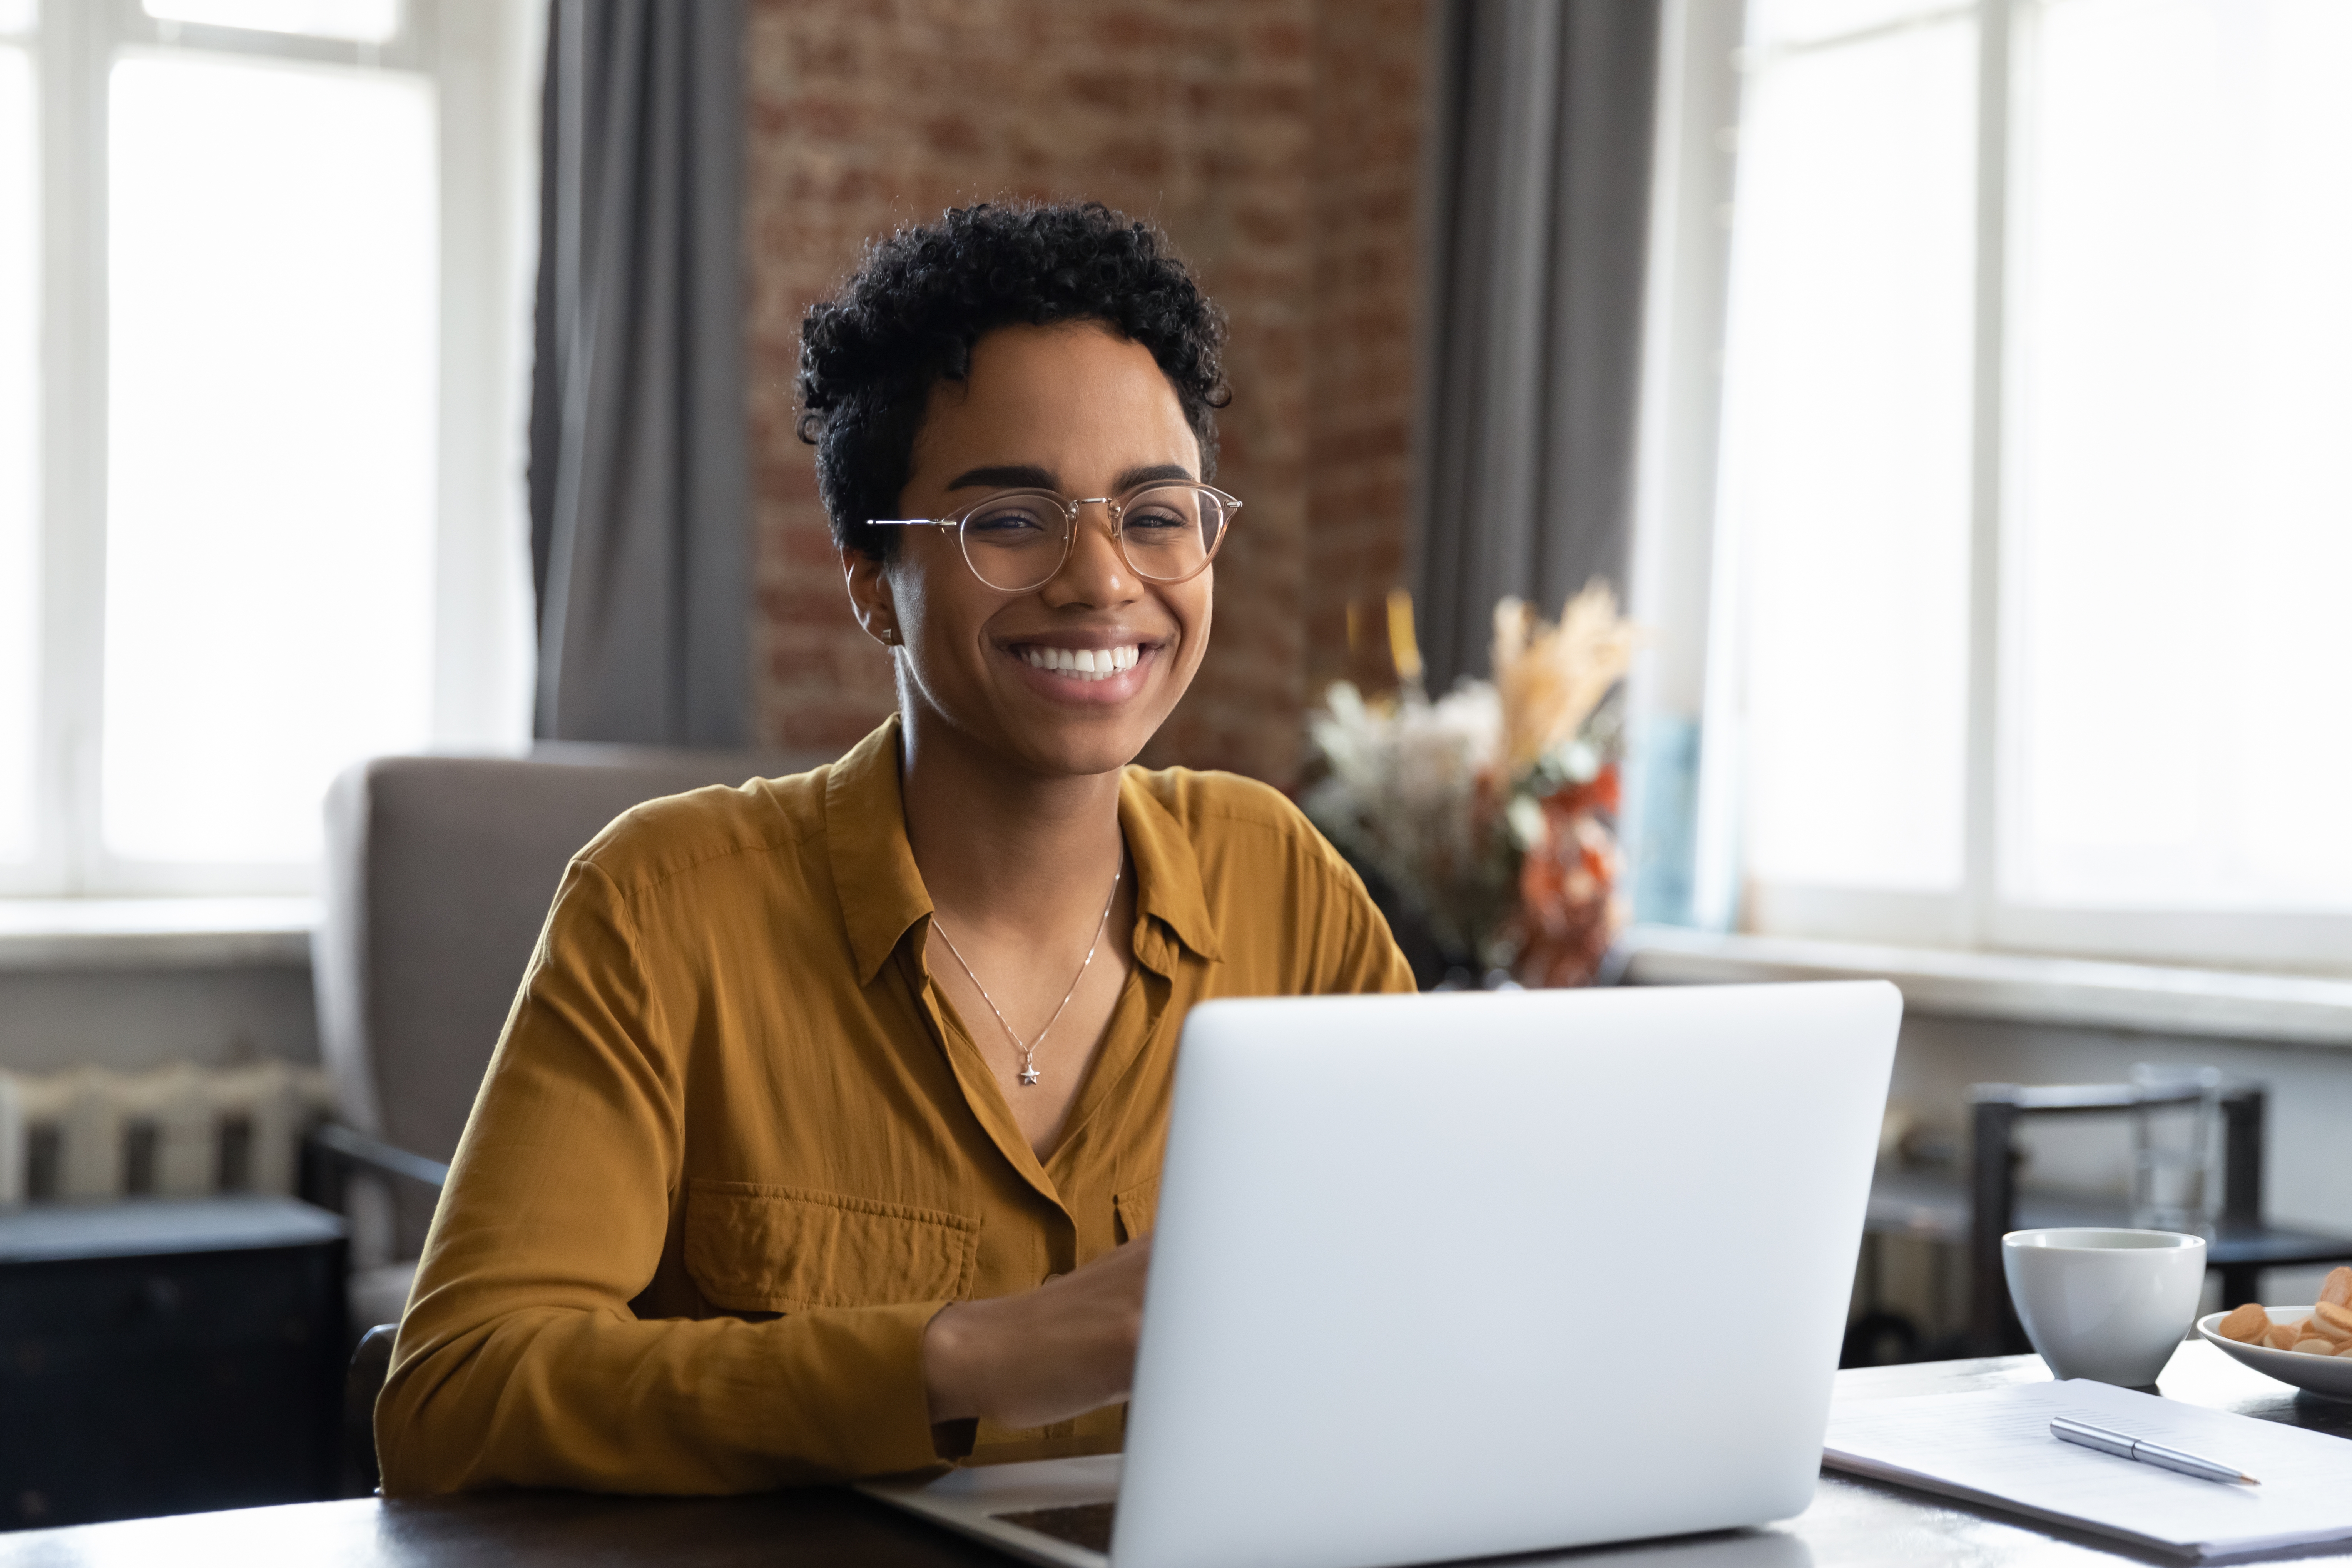 woman wearing glasses and smiling sits at a desk working on a computer